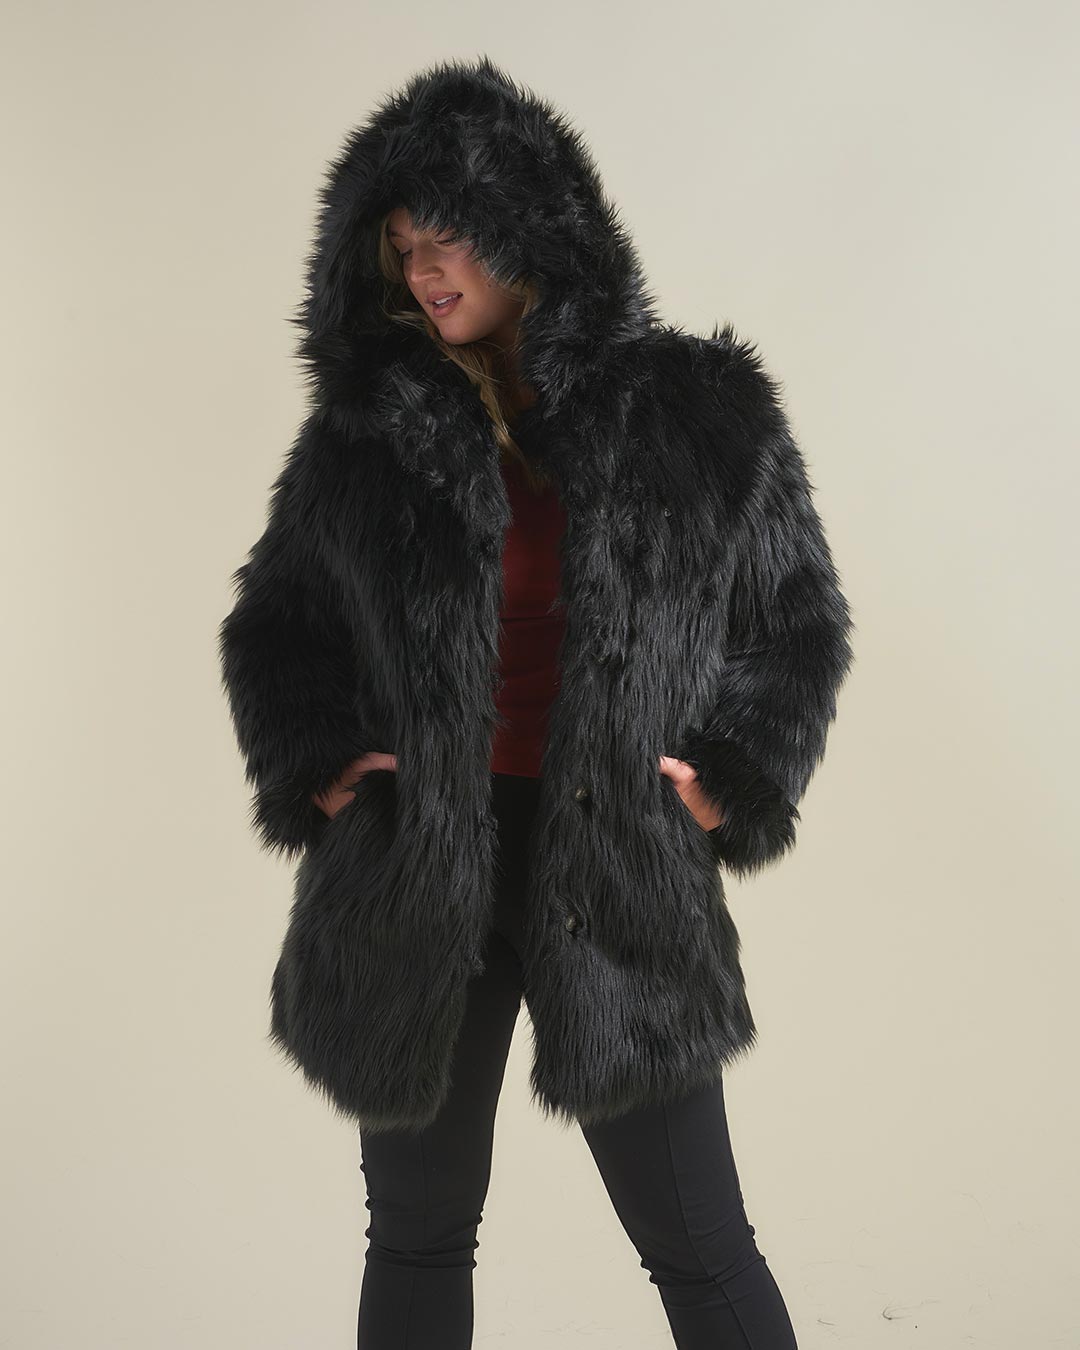 Woman Looking Down With Hands in Pockets While Wearing Black Wolf Hooded Faux Fur Coat